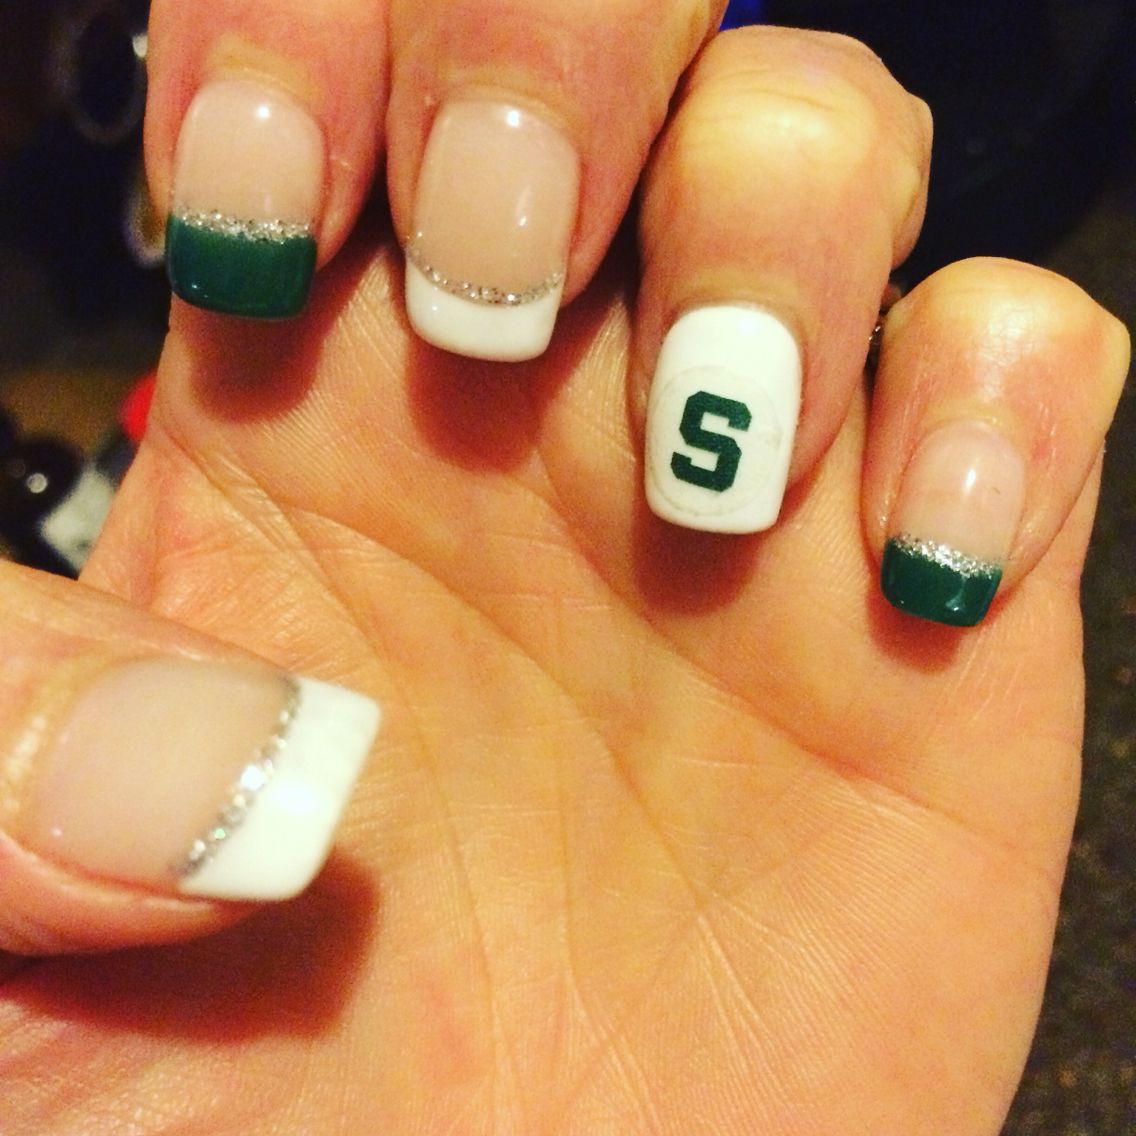 Michigan State Game Day nails!